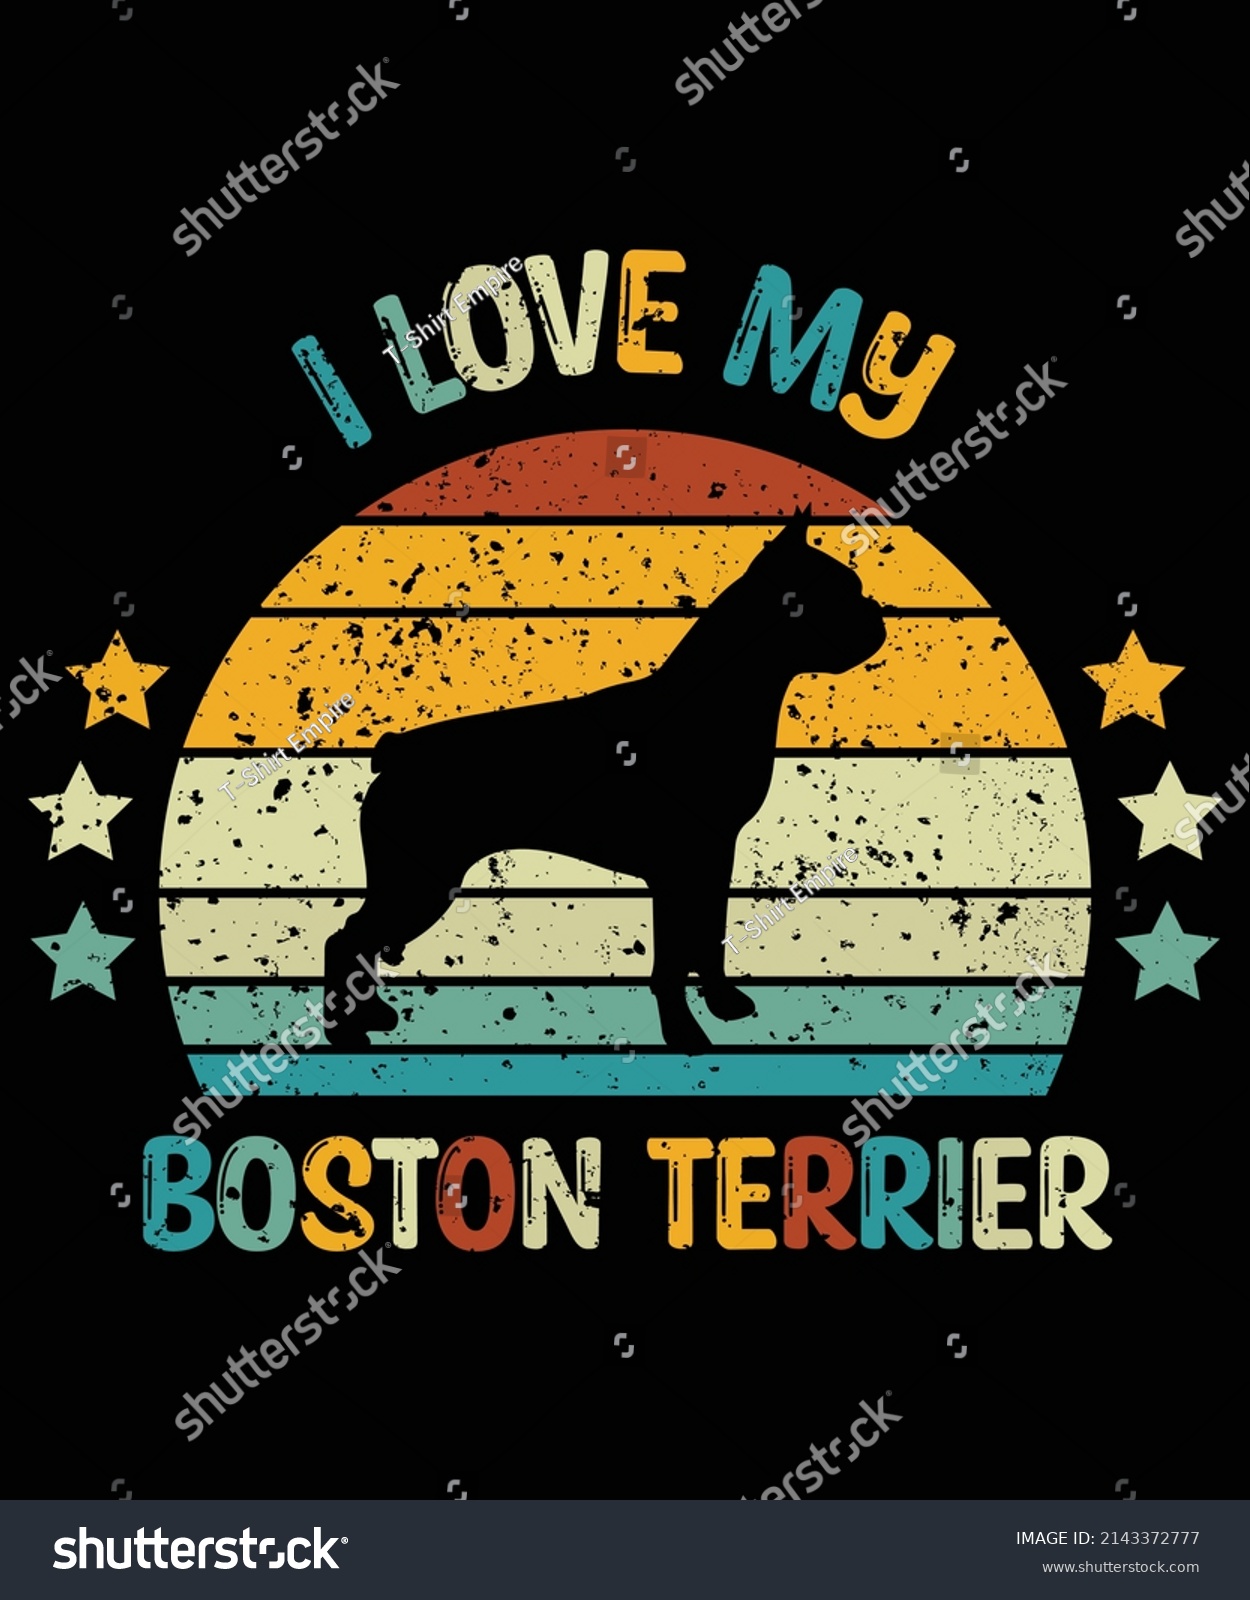 SVG of Boston Terrier silhouette vintage and retro t-shirt design
 svg